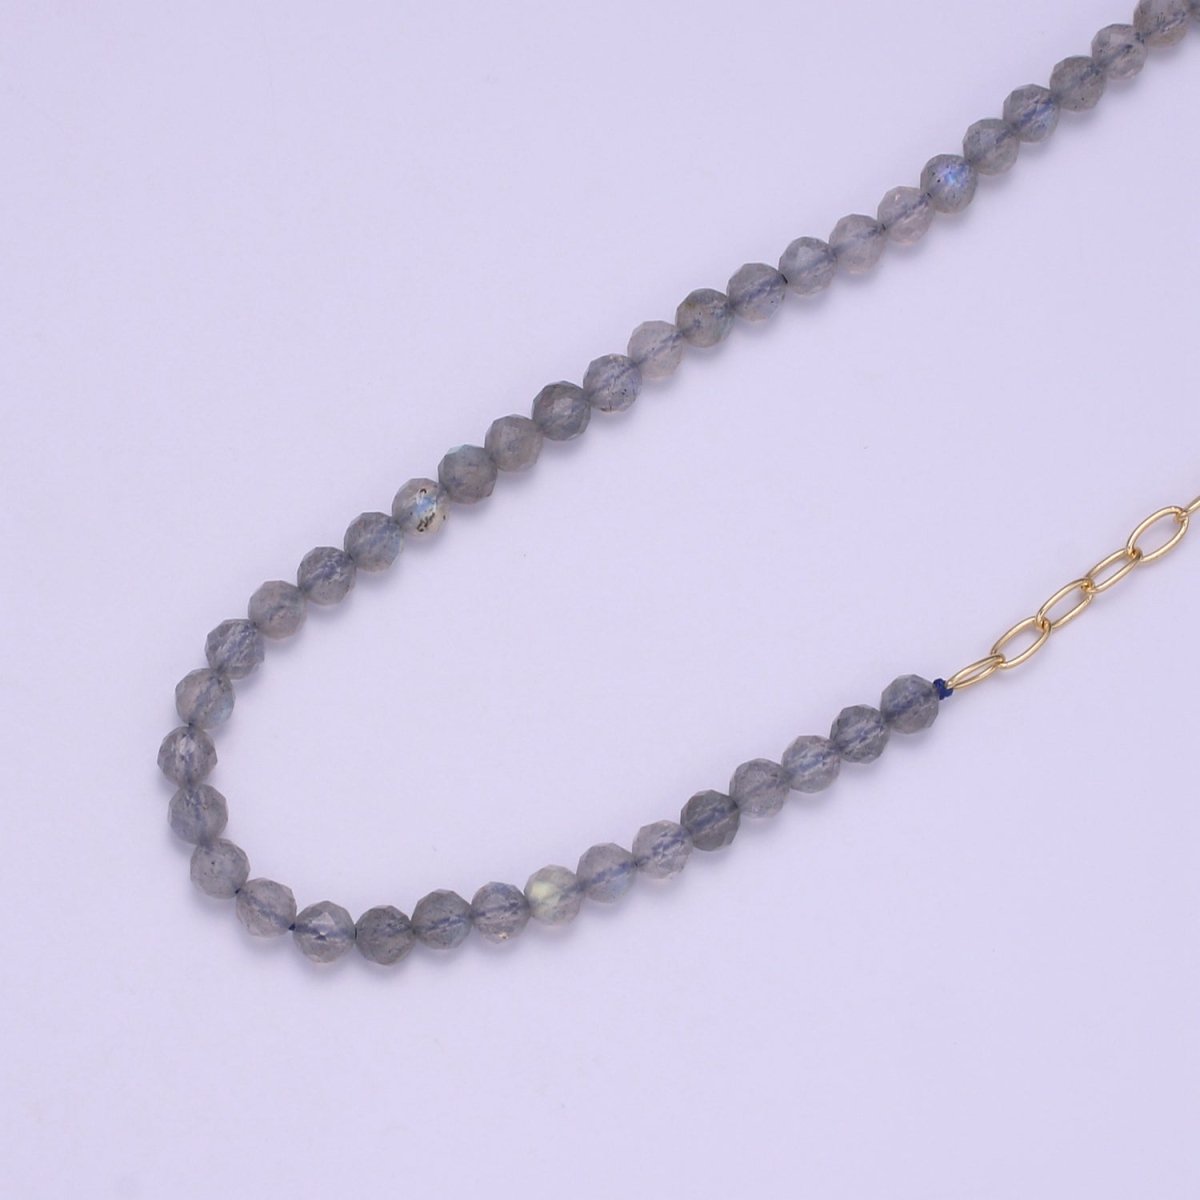 Mixed Chain Necklace, Fused Labradorite Beads necklace w/ 14k Gold Filled Necklace, Cable Link Chain Necklace, Unique Dainty Necklace | WA-030 Clearance Pricing - DLUXCA